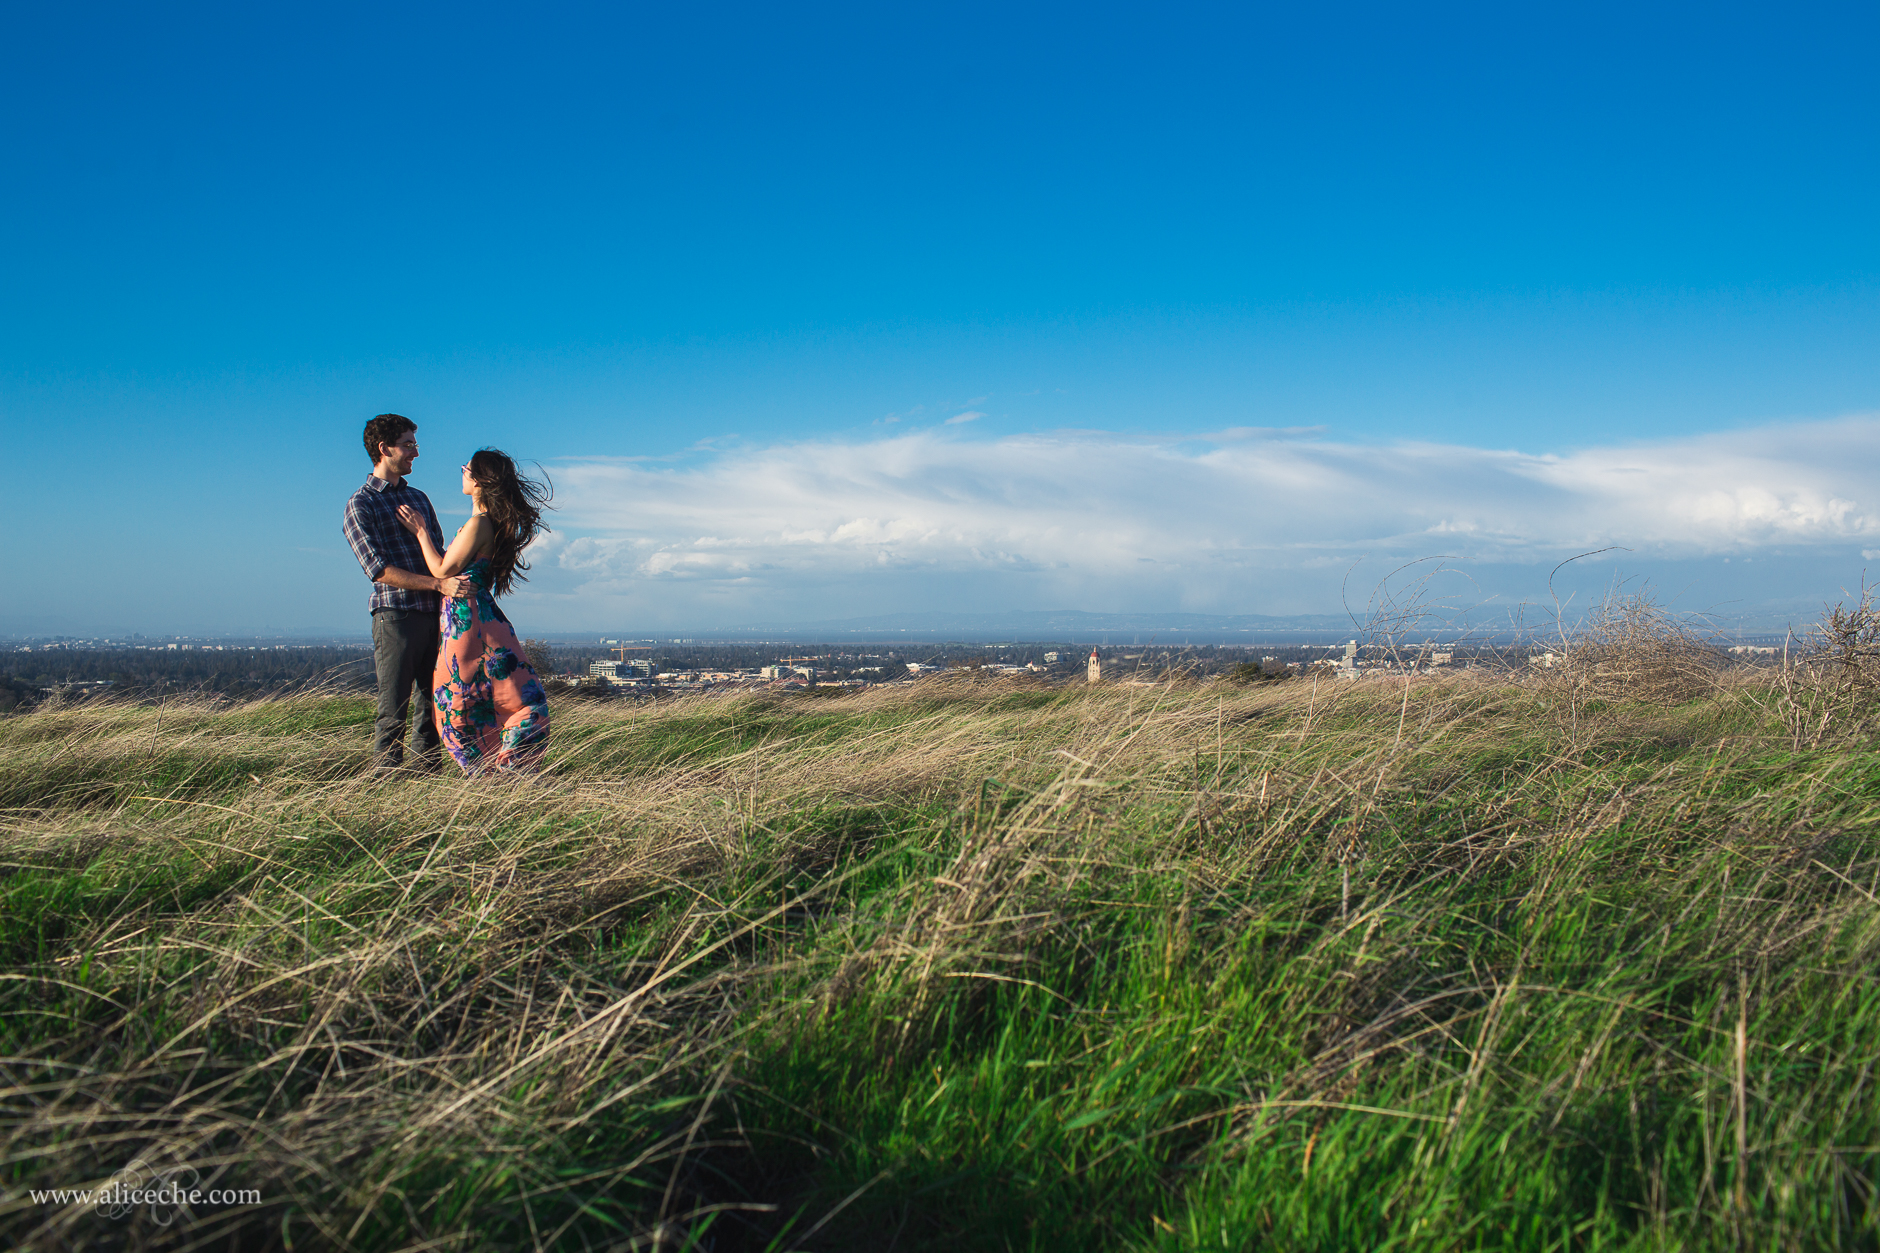 alice-che-photography-stanford-dish-windswept-couple-blue-skies-green-grass